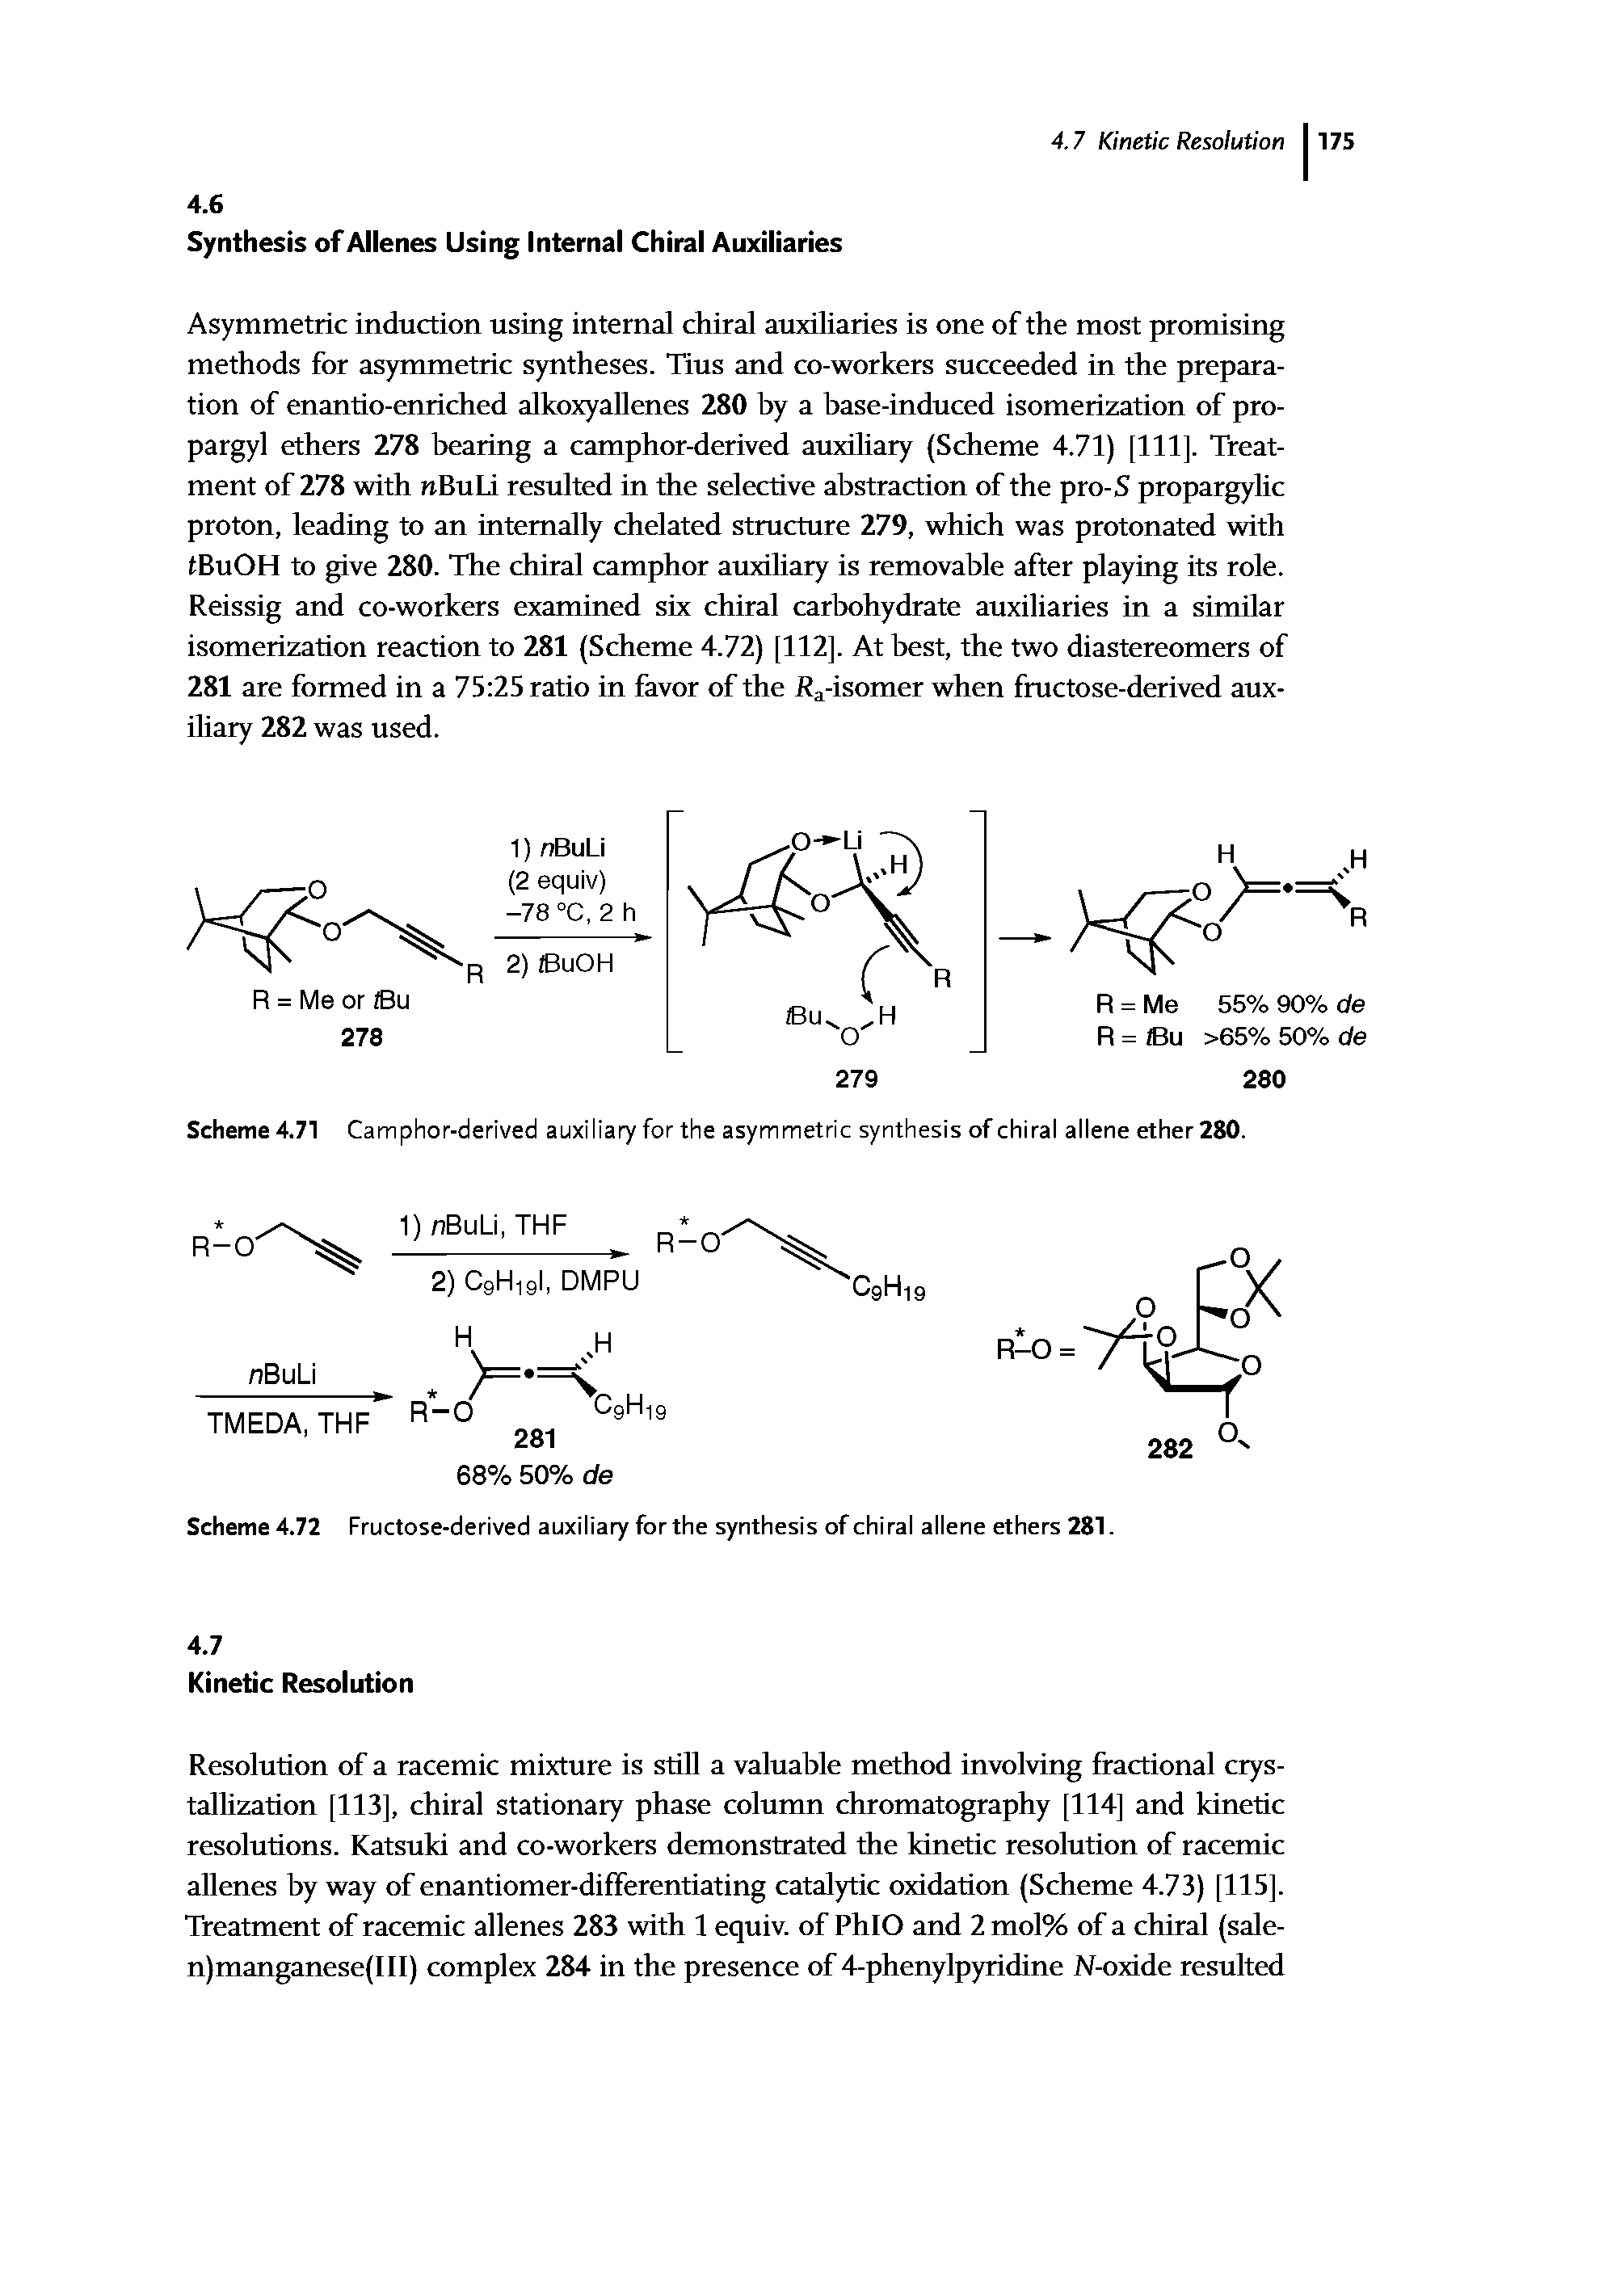 Scheme 4.71 Camphor-derived auxiliary for the asymmetric synthesis of chiral allene ether 280.